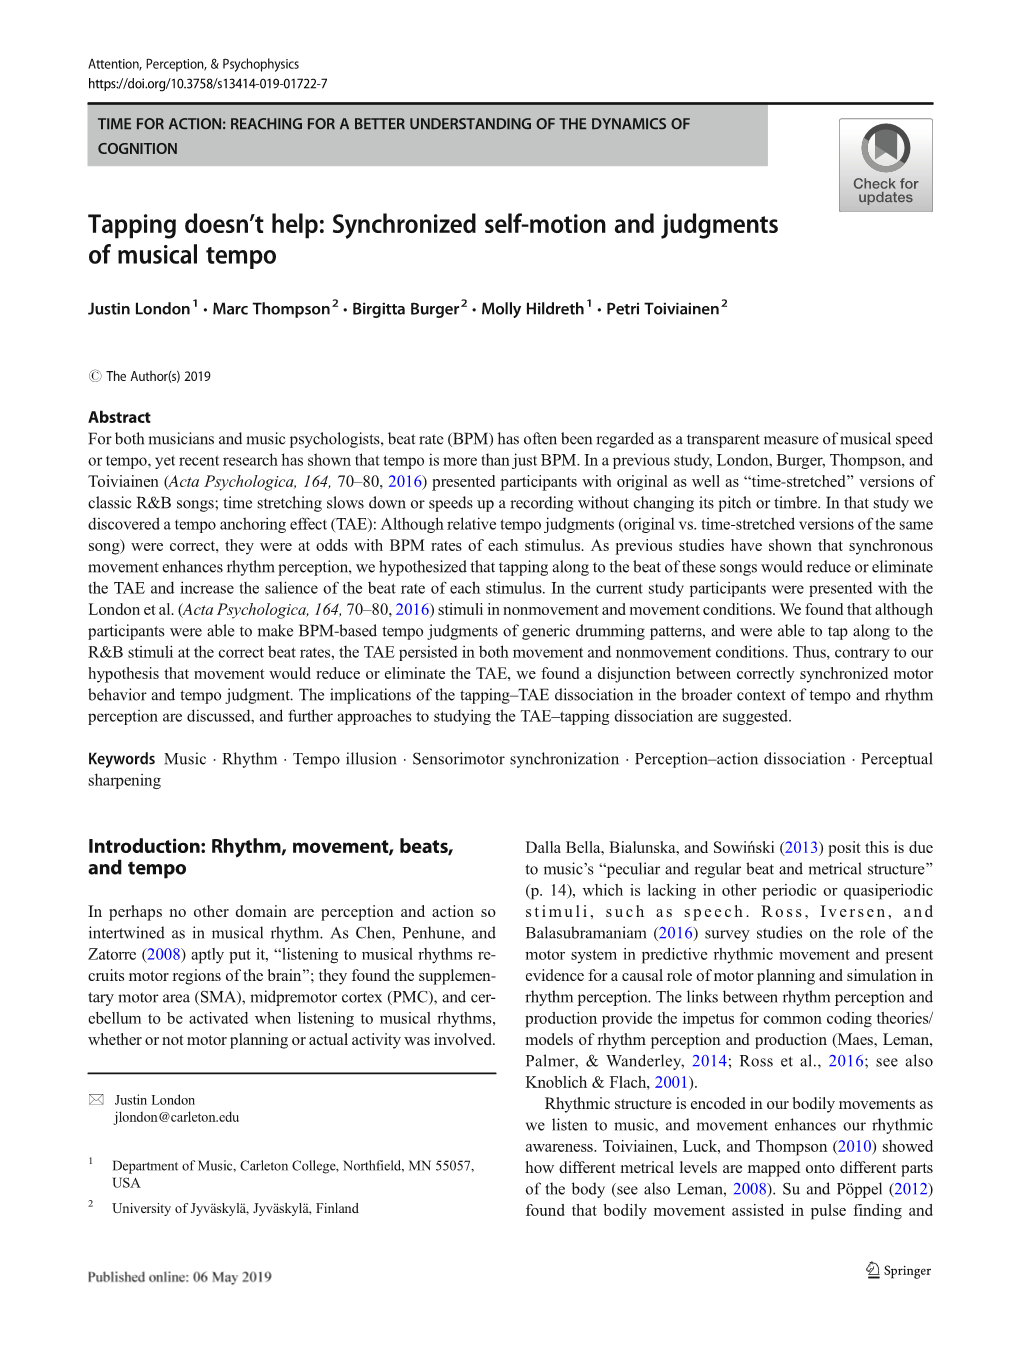 Tapping Doesn't Help: Synchronized Self-Motion and Judgments of Musical Tempo